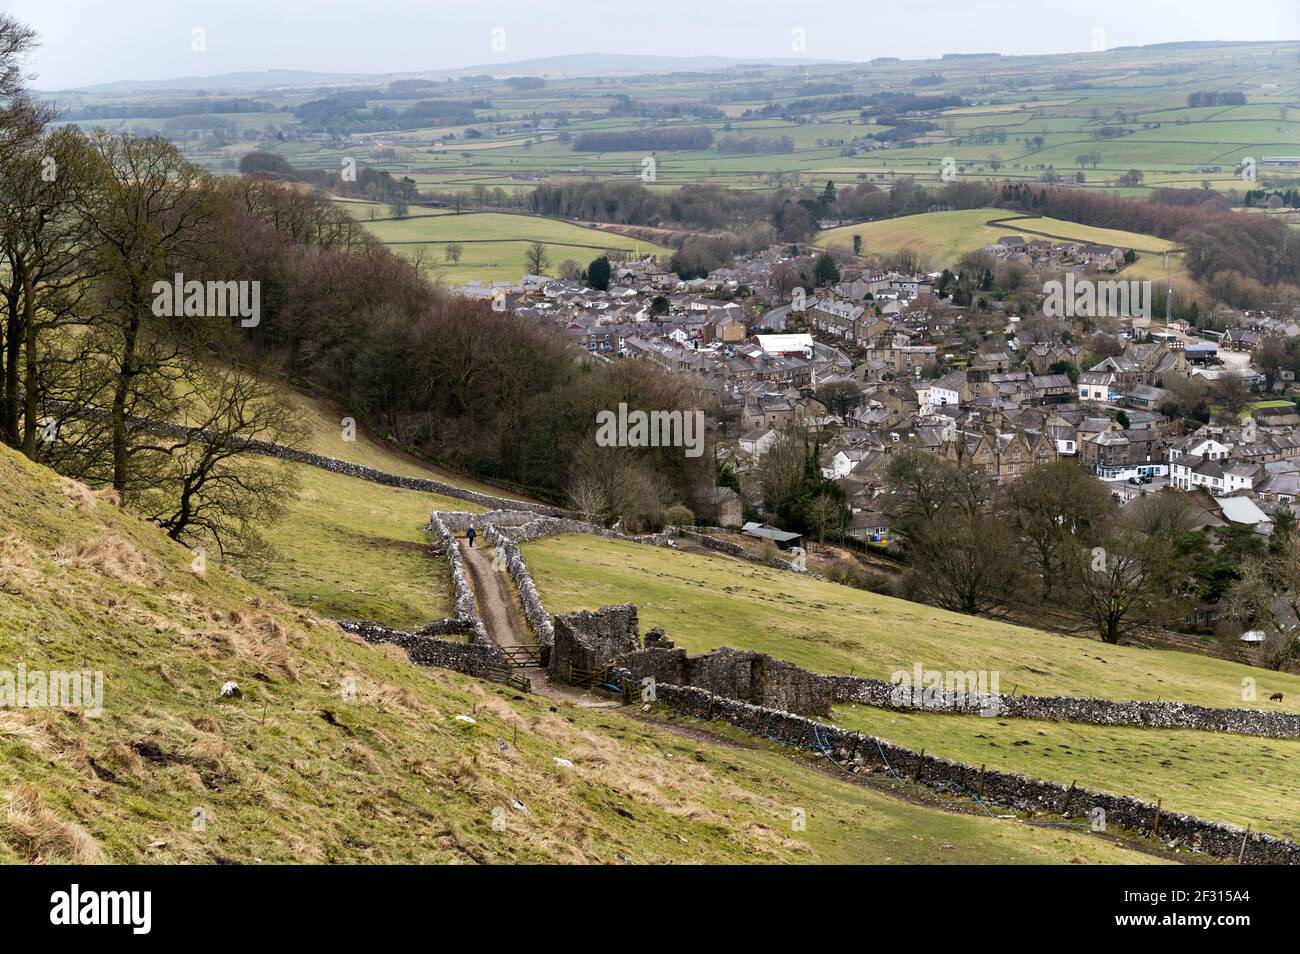 View over the small rural market town of Settle, North Yorkshire, UK. The town is on the edge of the Yorkshire Dales National Park. Stock Photo